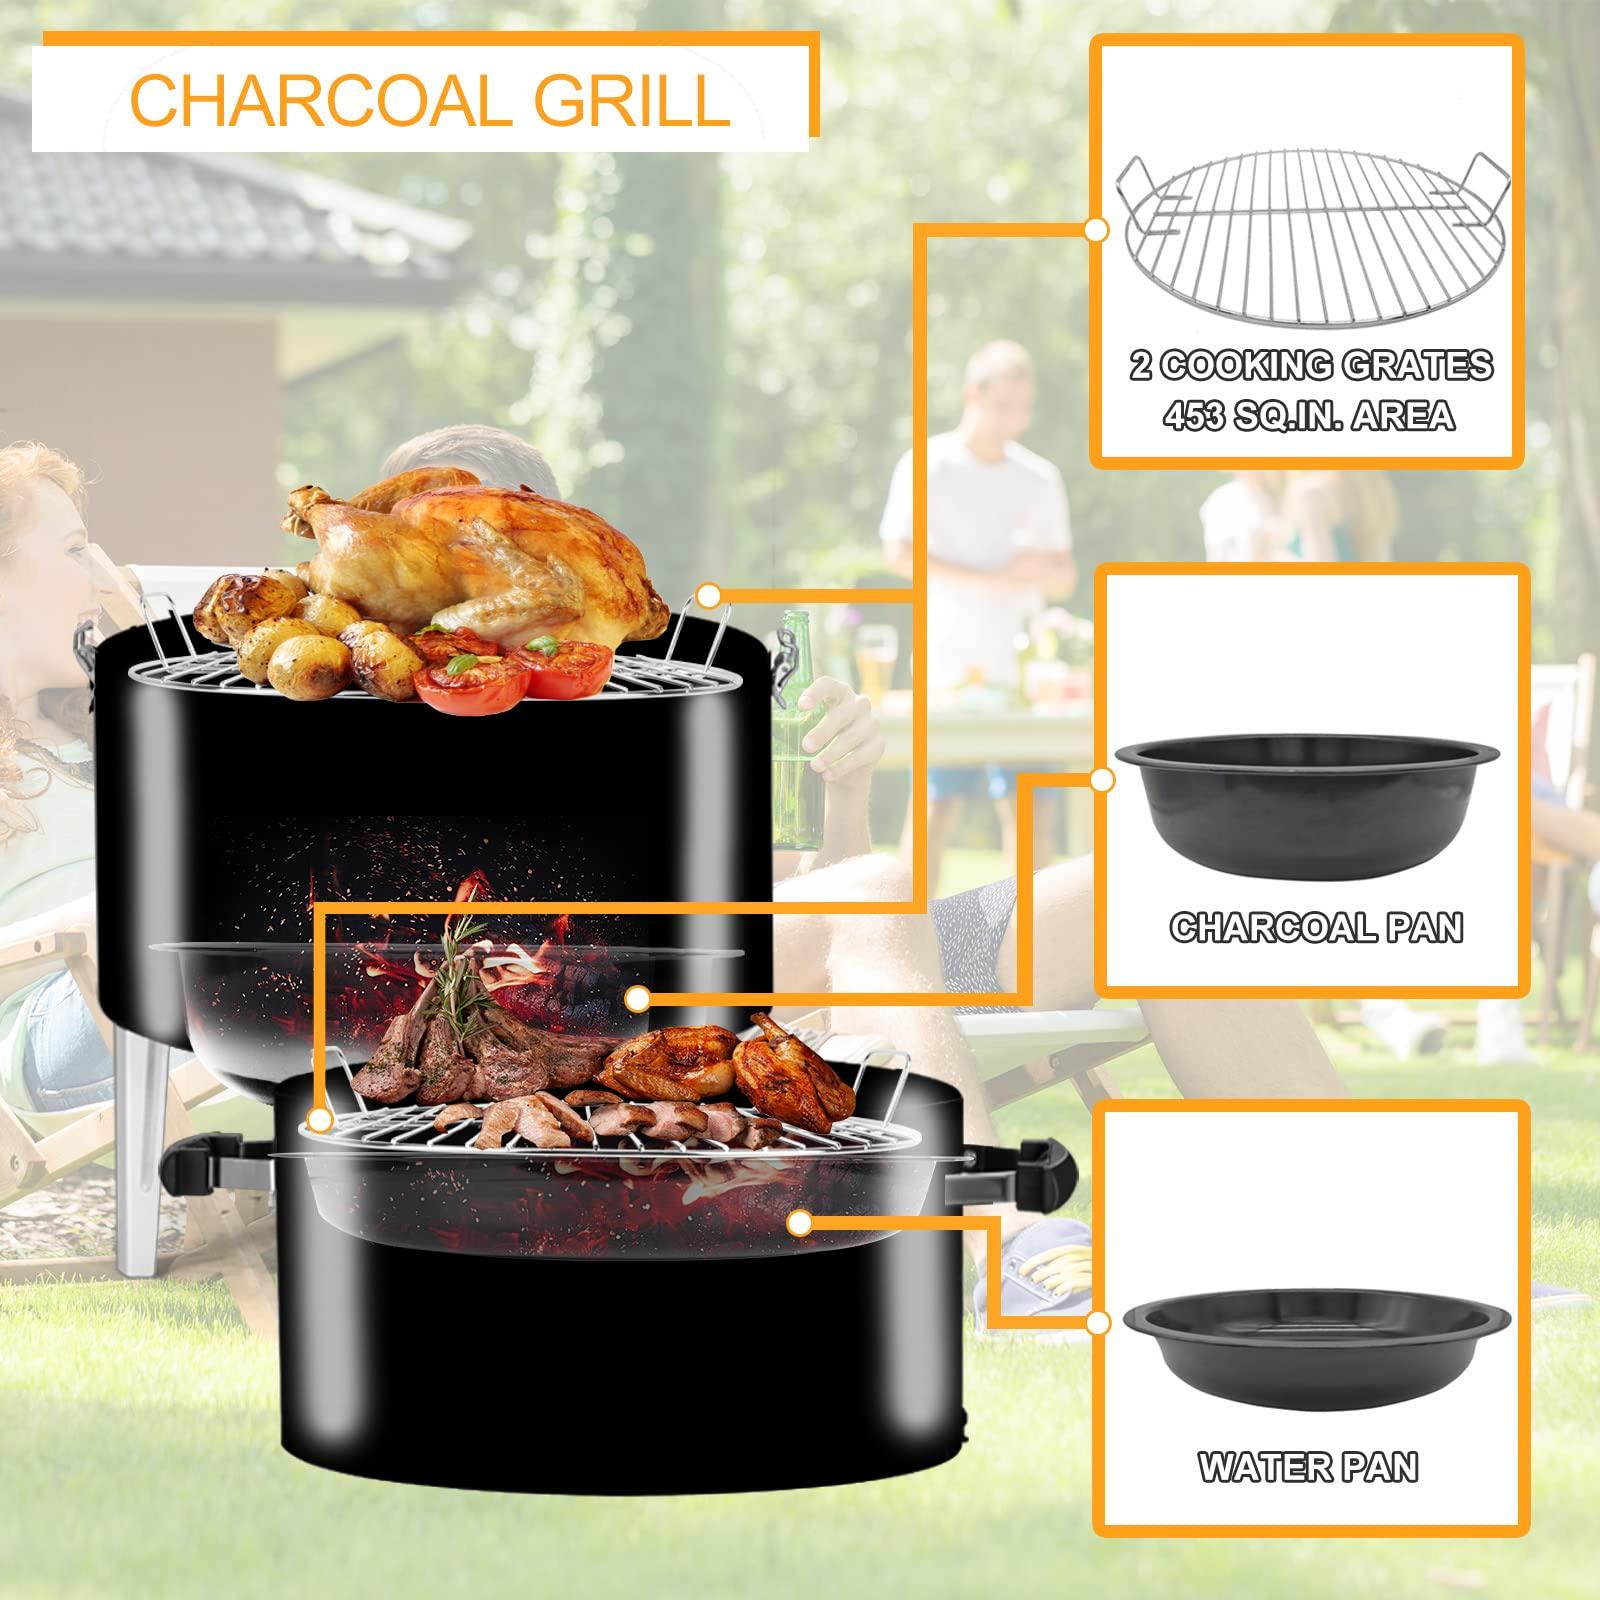 SUNLIFER Portable Charcoal BBQ Grill: Outdoor Small Charcoal Grills with Meat Smoker Combo for Backyard Patio Barbecue | Outdoor Smoking | Camping BBQ | Outside Cooking - CookCave